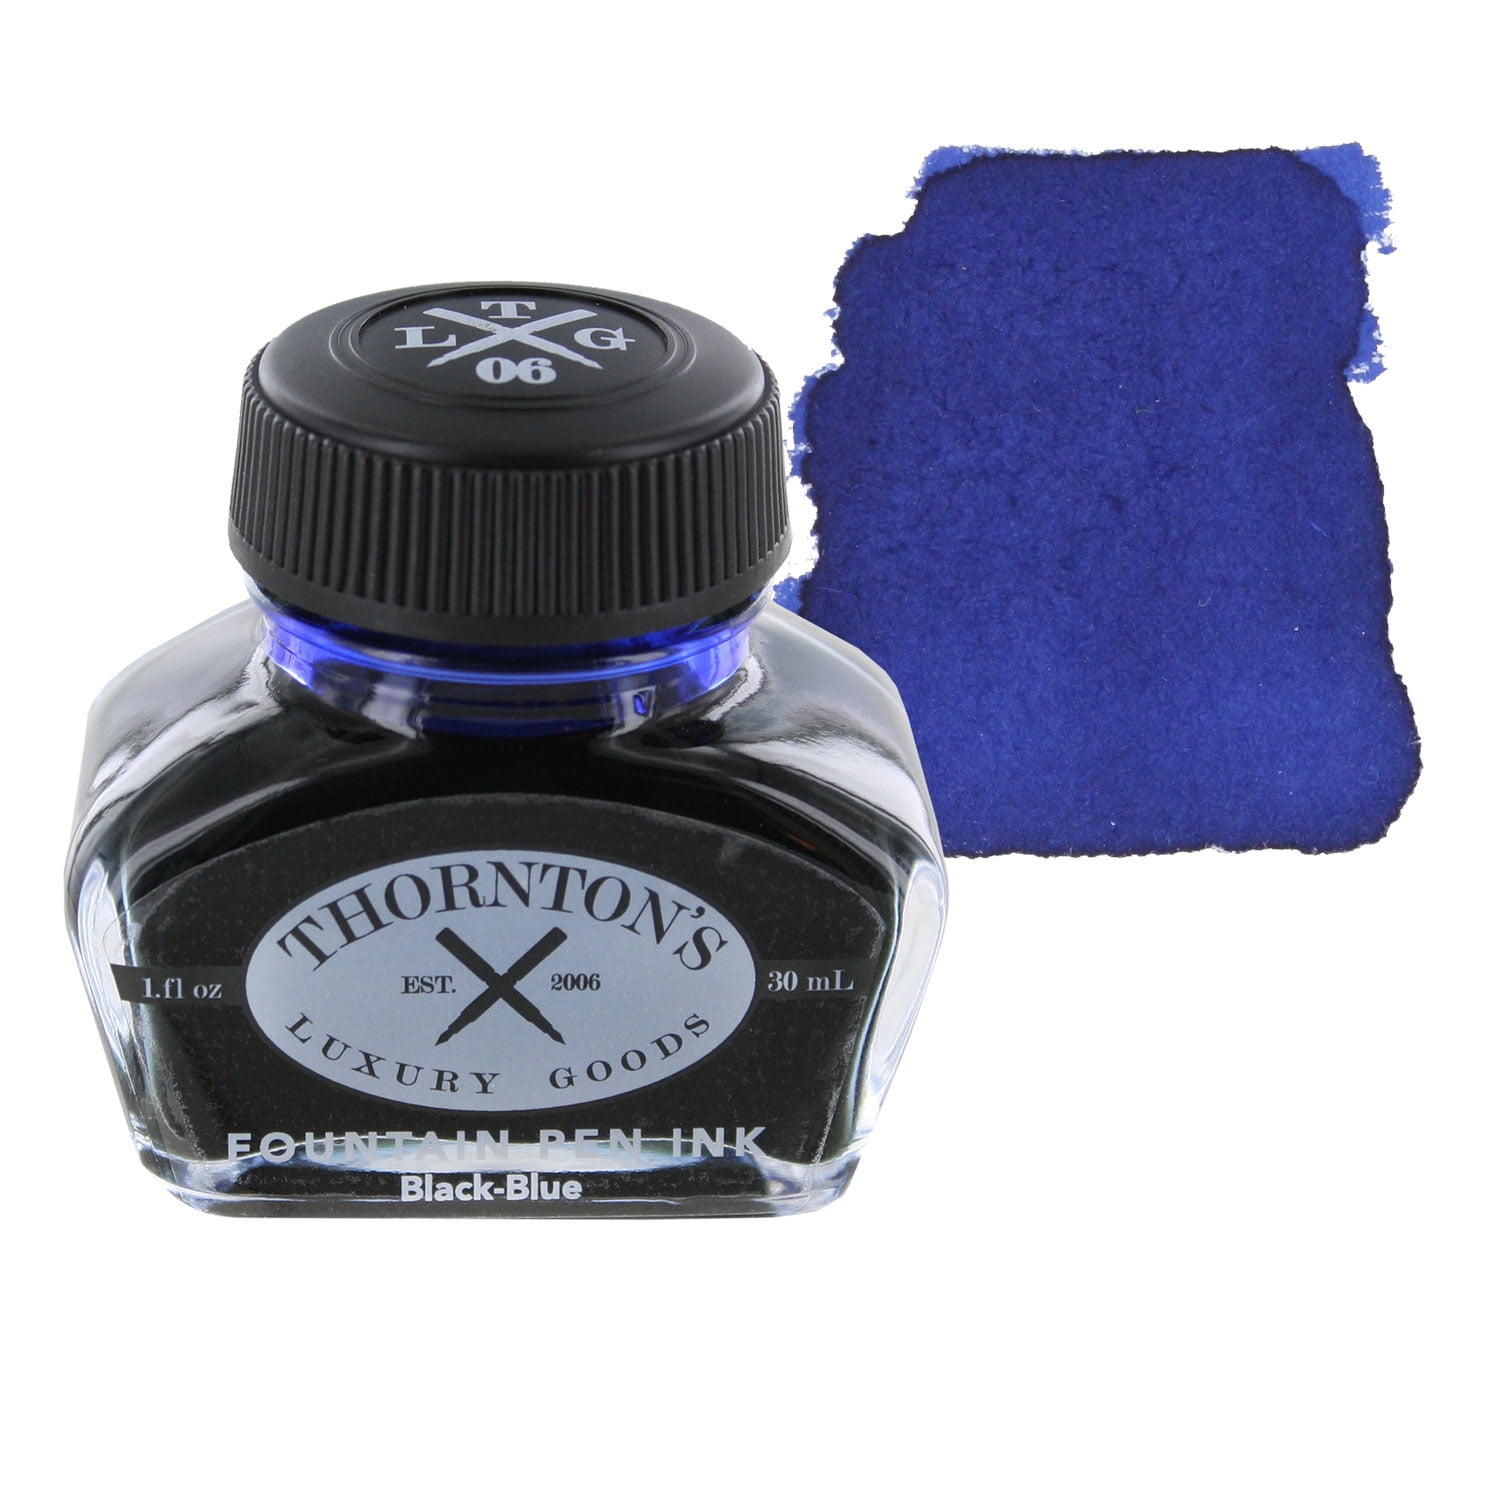 20ml Pen House Blue Black Ink By Pent - Premium Dye Ink for Fountain Pens  with No Clogging, Office School Supplies - AliExpress